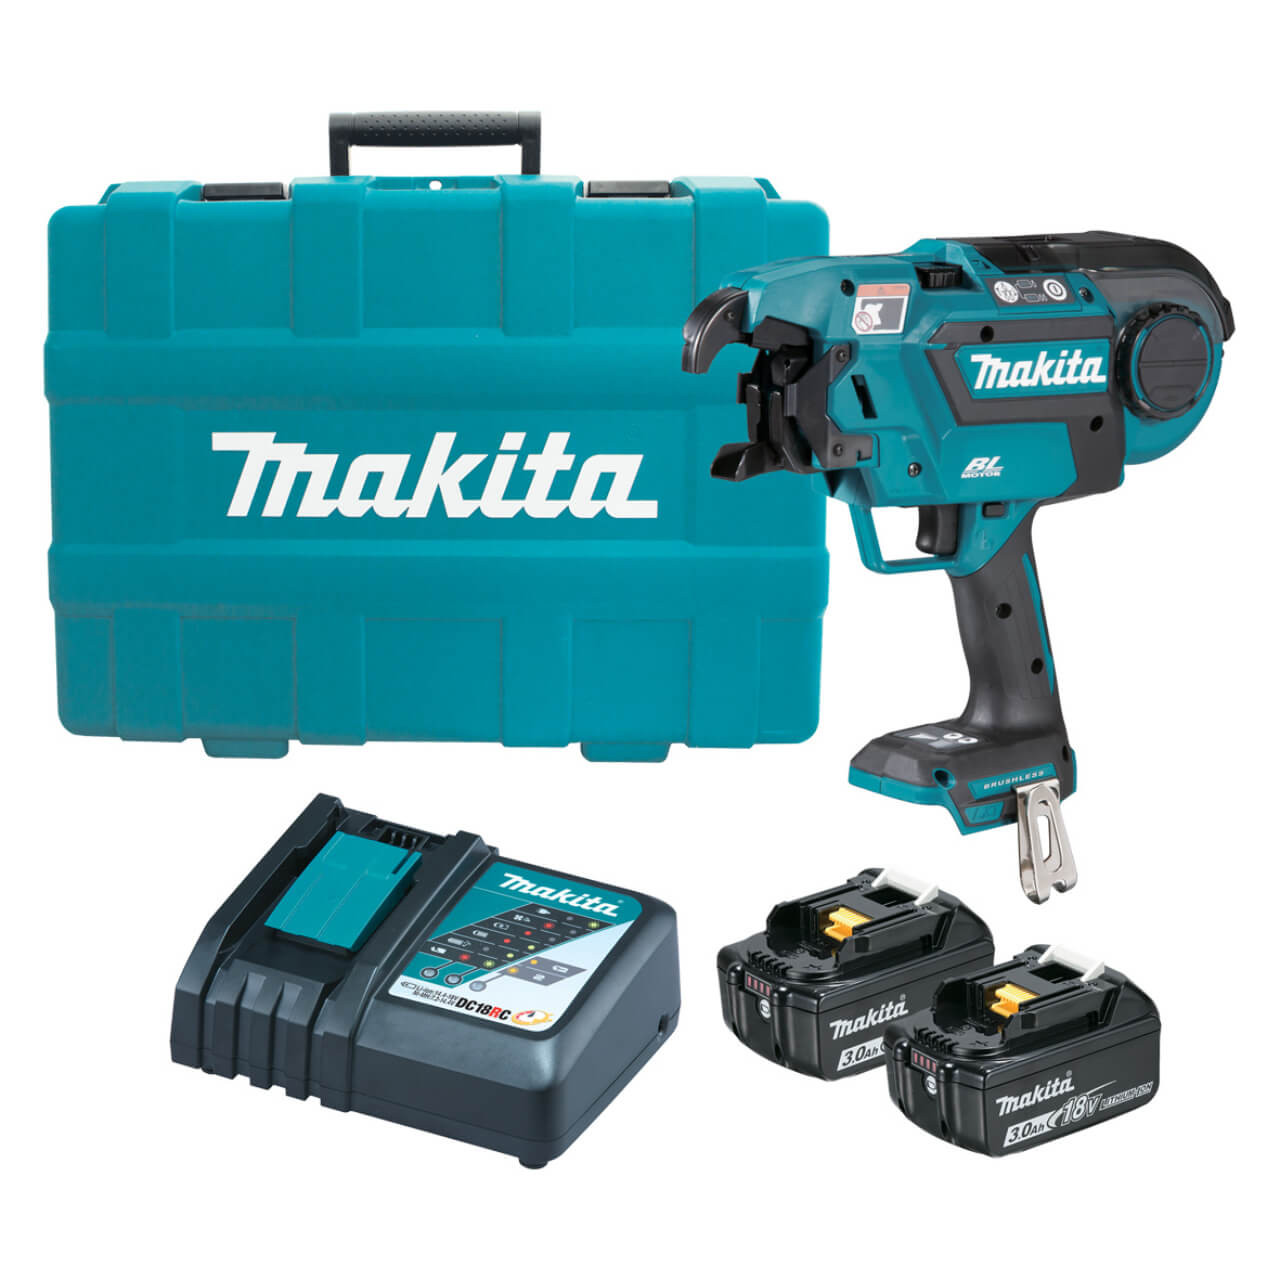 Makita 18V BRUSHLESS Rebar Tying Tool Kit - Includes 2 x 3.0Ah Batteries. Rapid Charger & Carry Case